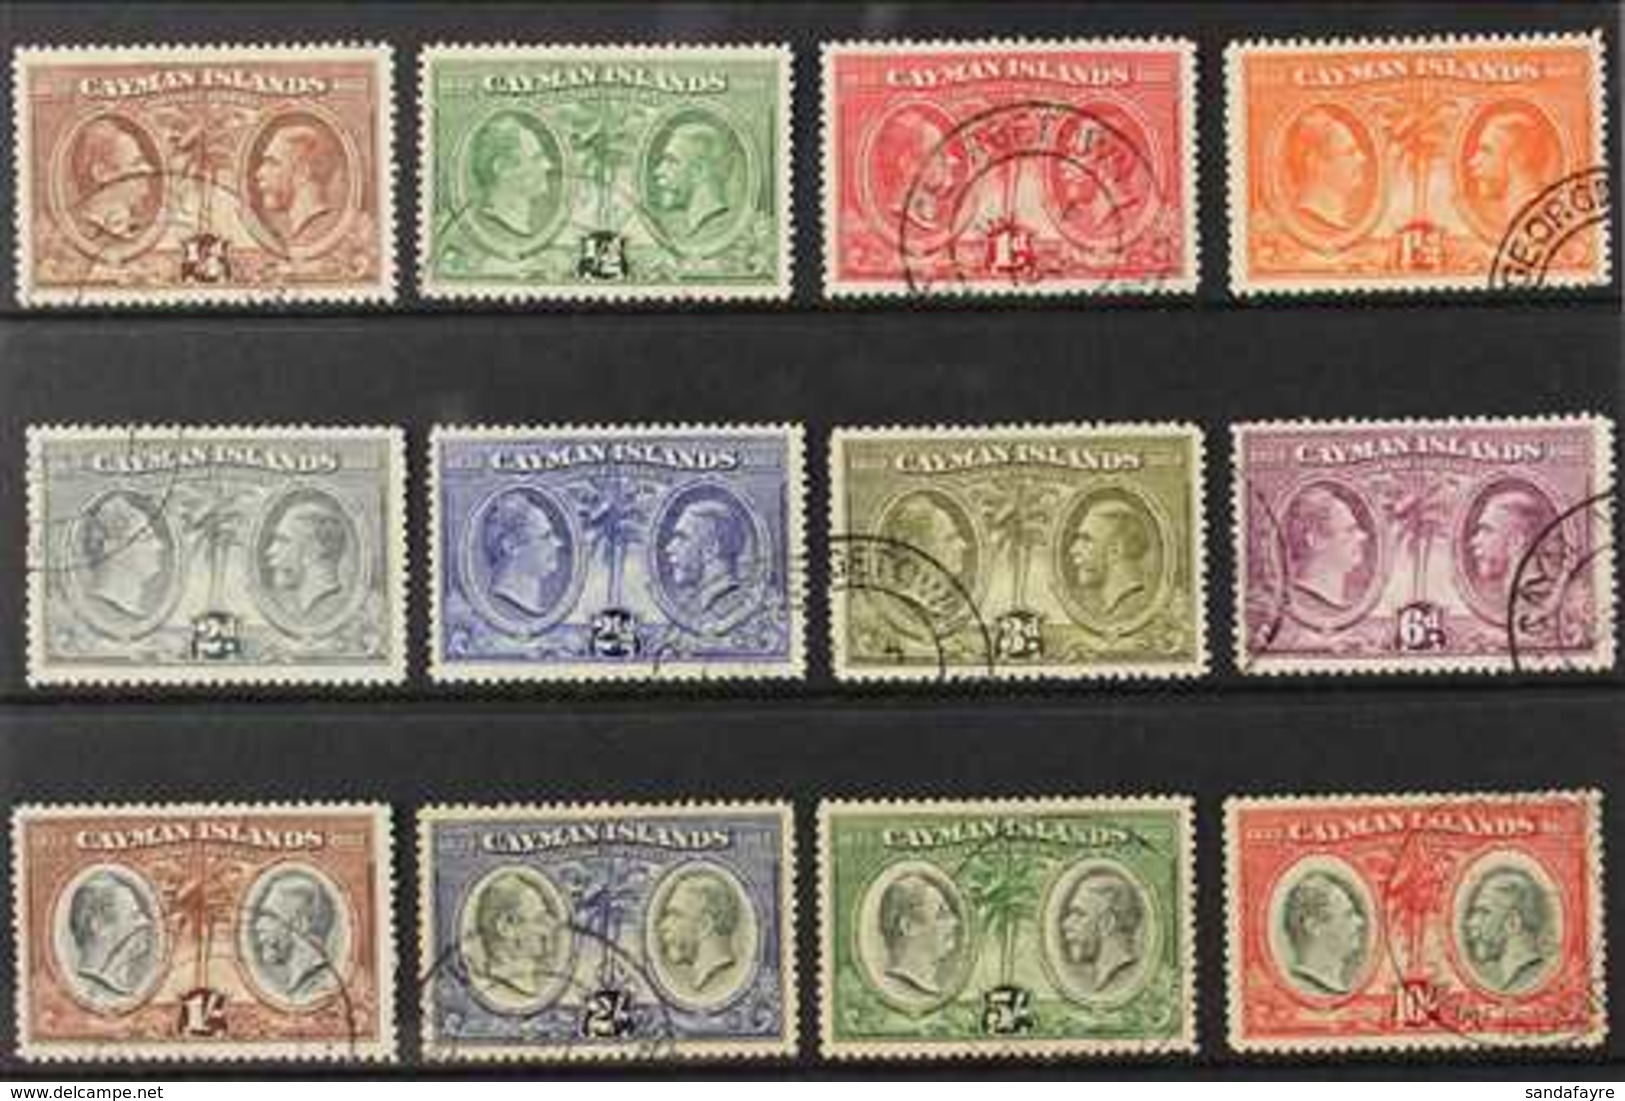 1932 Centenary Of The Assembly Of Justices & Vestry Complete Set, SG 84/95, Fine Used (12 Stamps) For More Images, Pleas - Kaaiman Eilanden